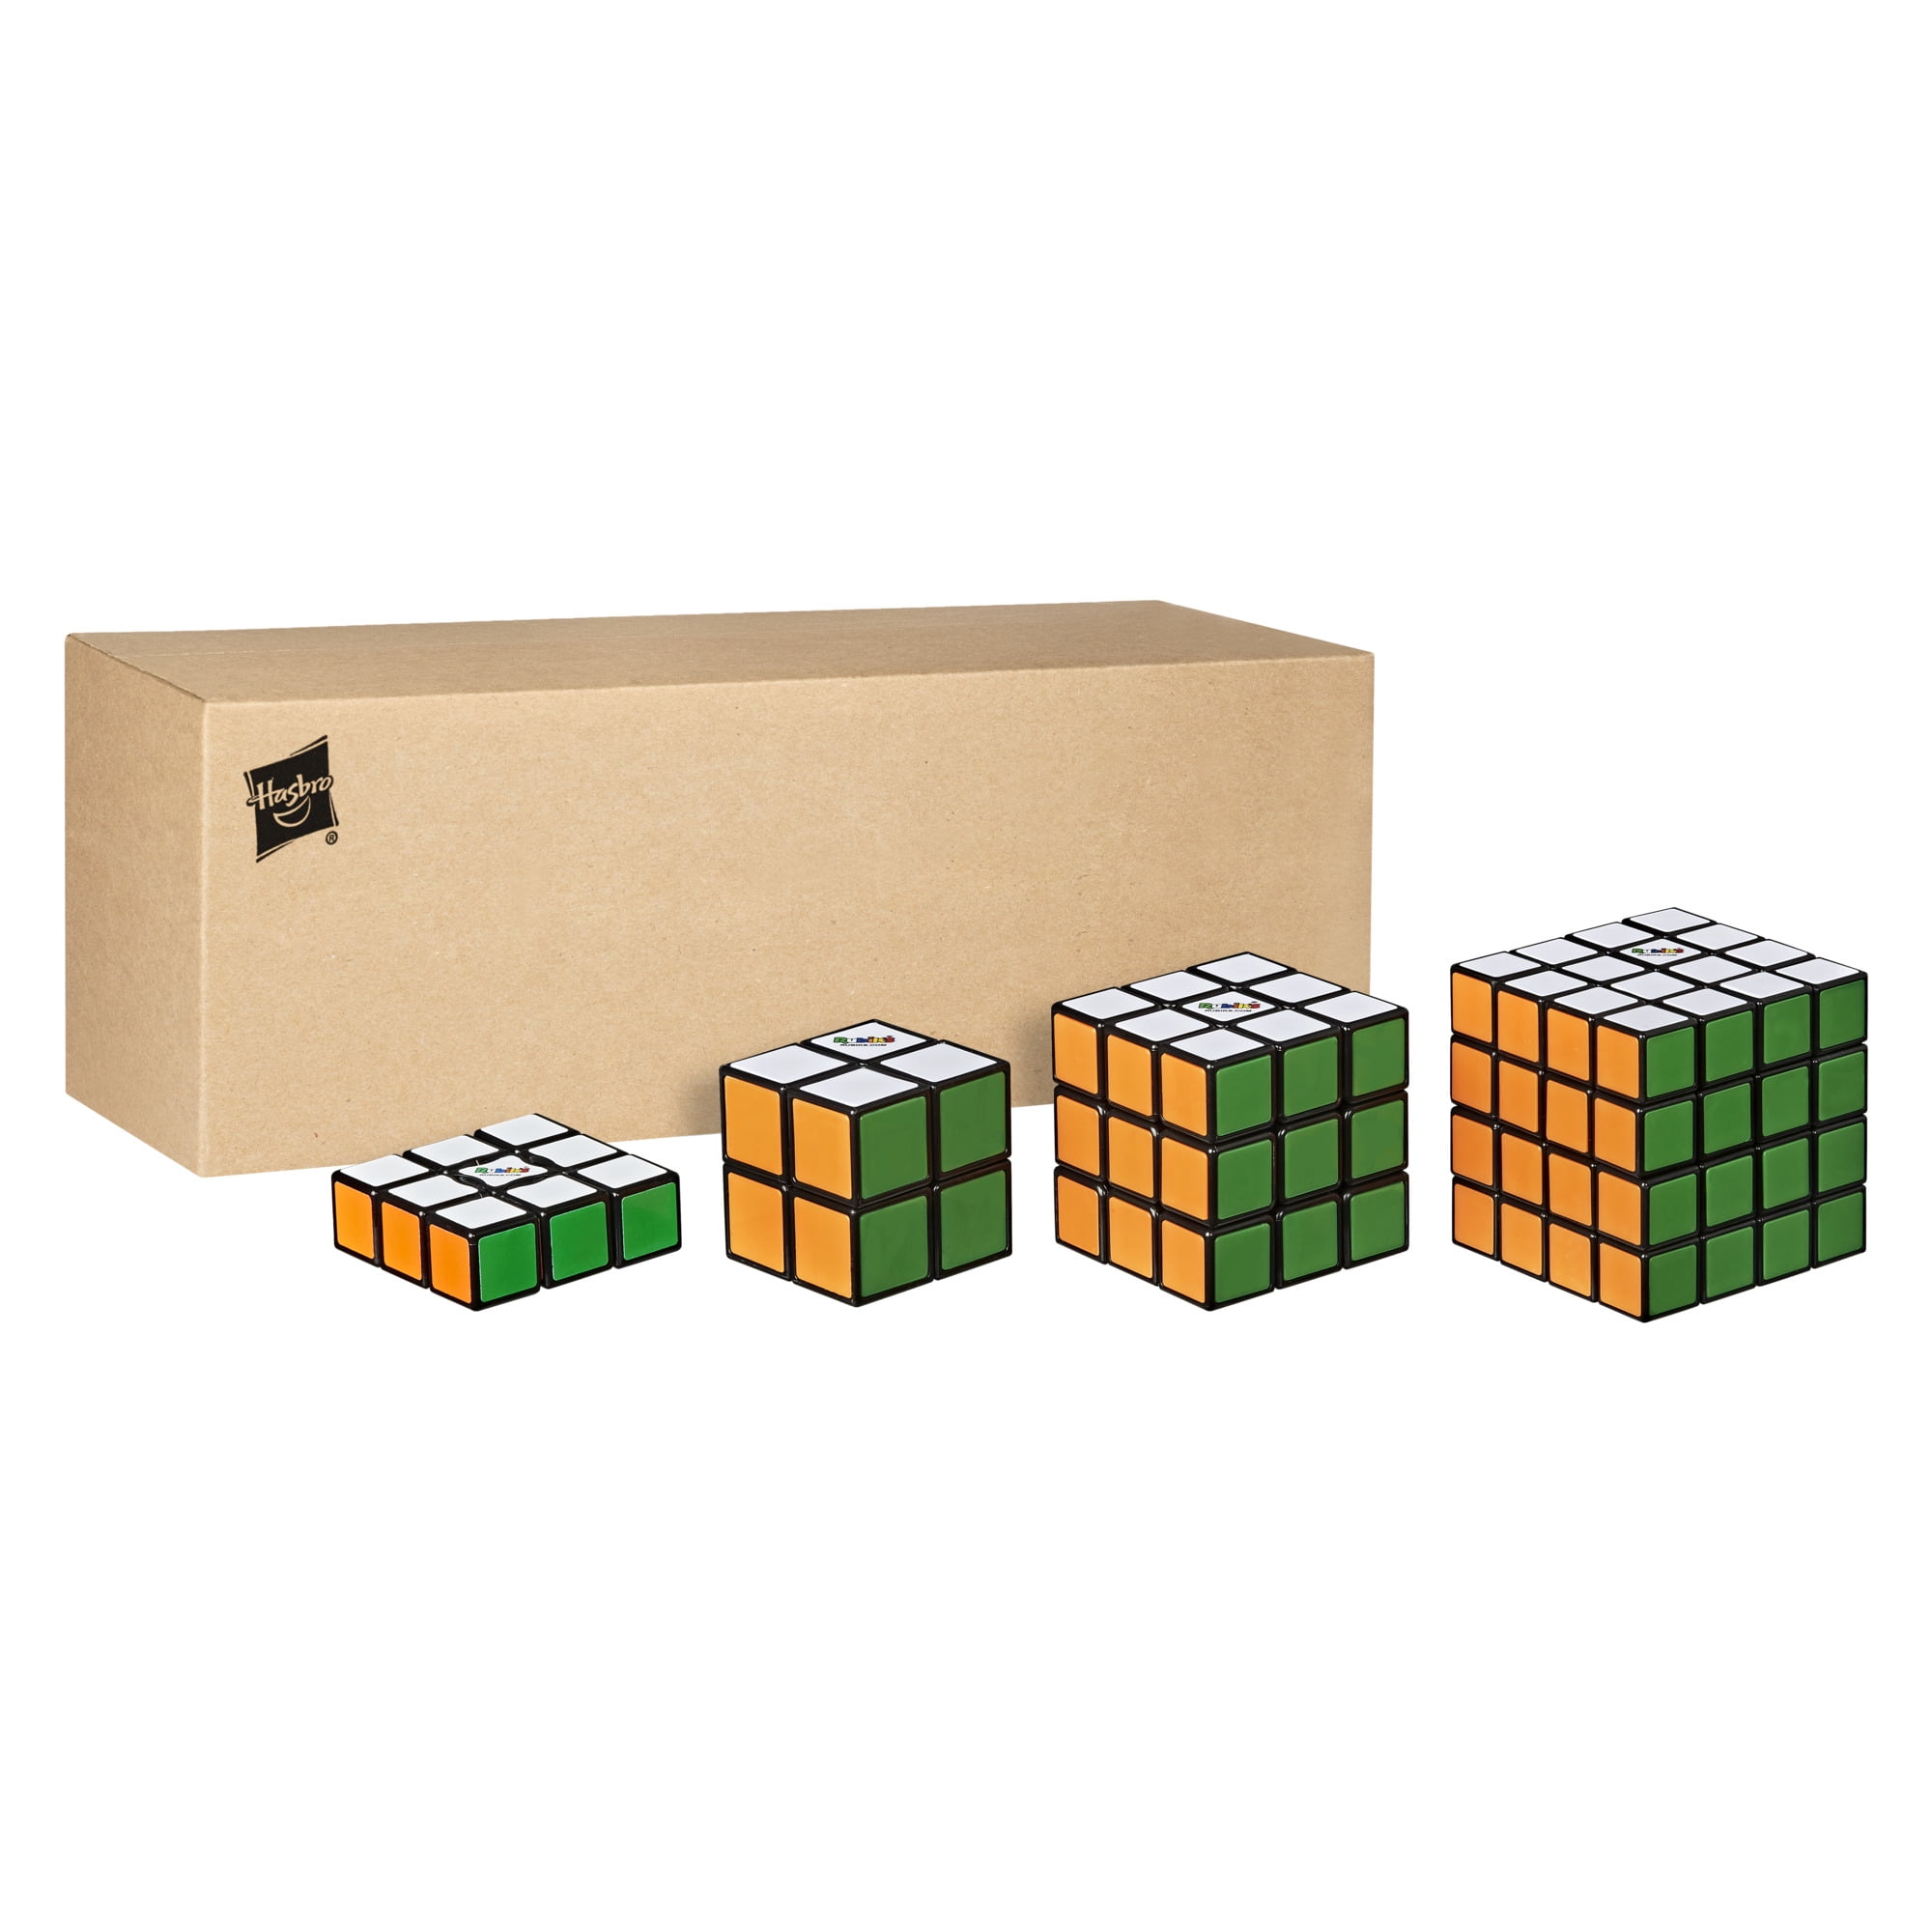 3x3x3 Magic Cube Plastic Saving Box Outer Packing toy accessories Pop new. 